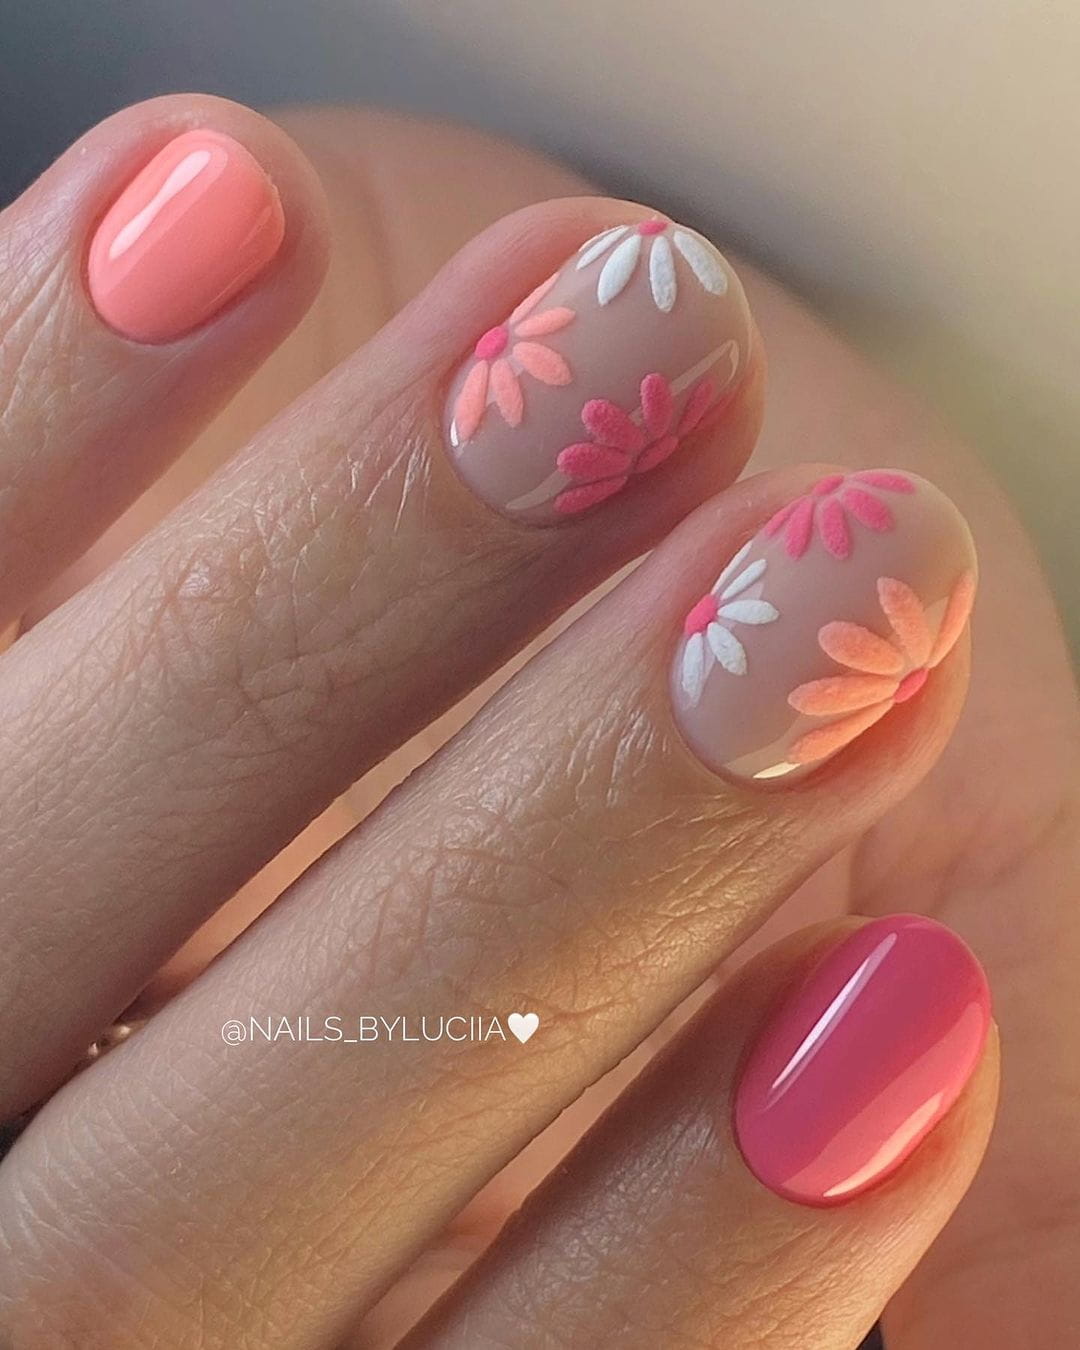 100 Of The Best Spring Inspired Nail Designs images 61